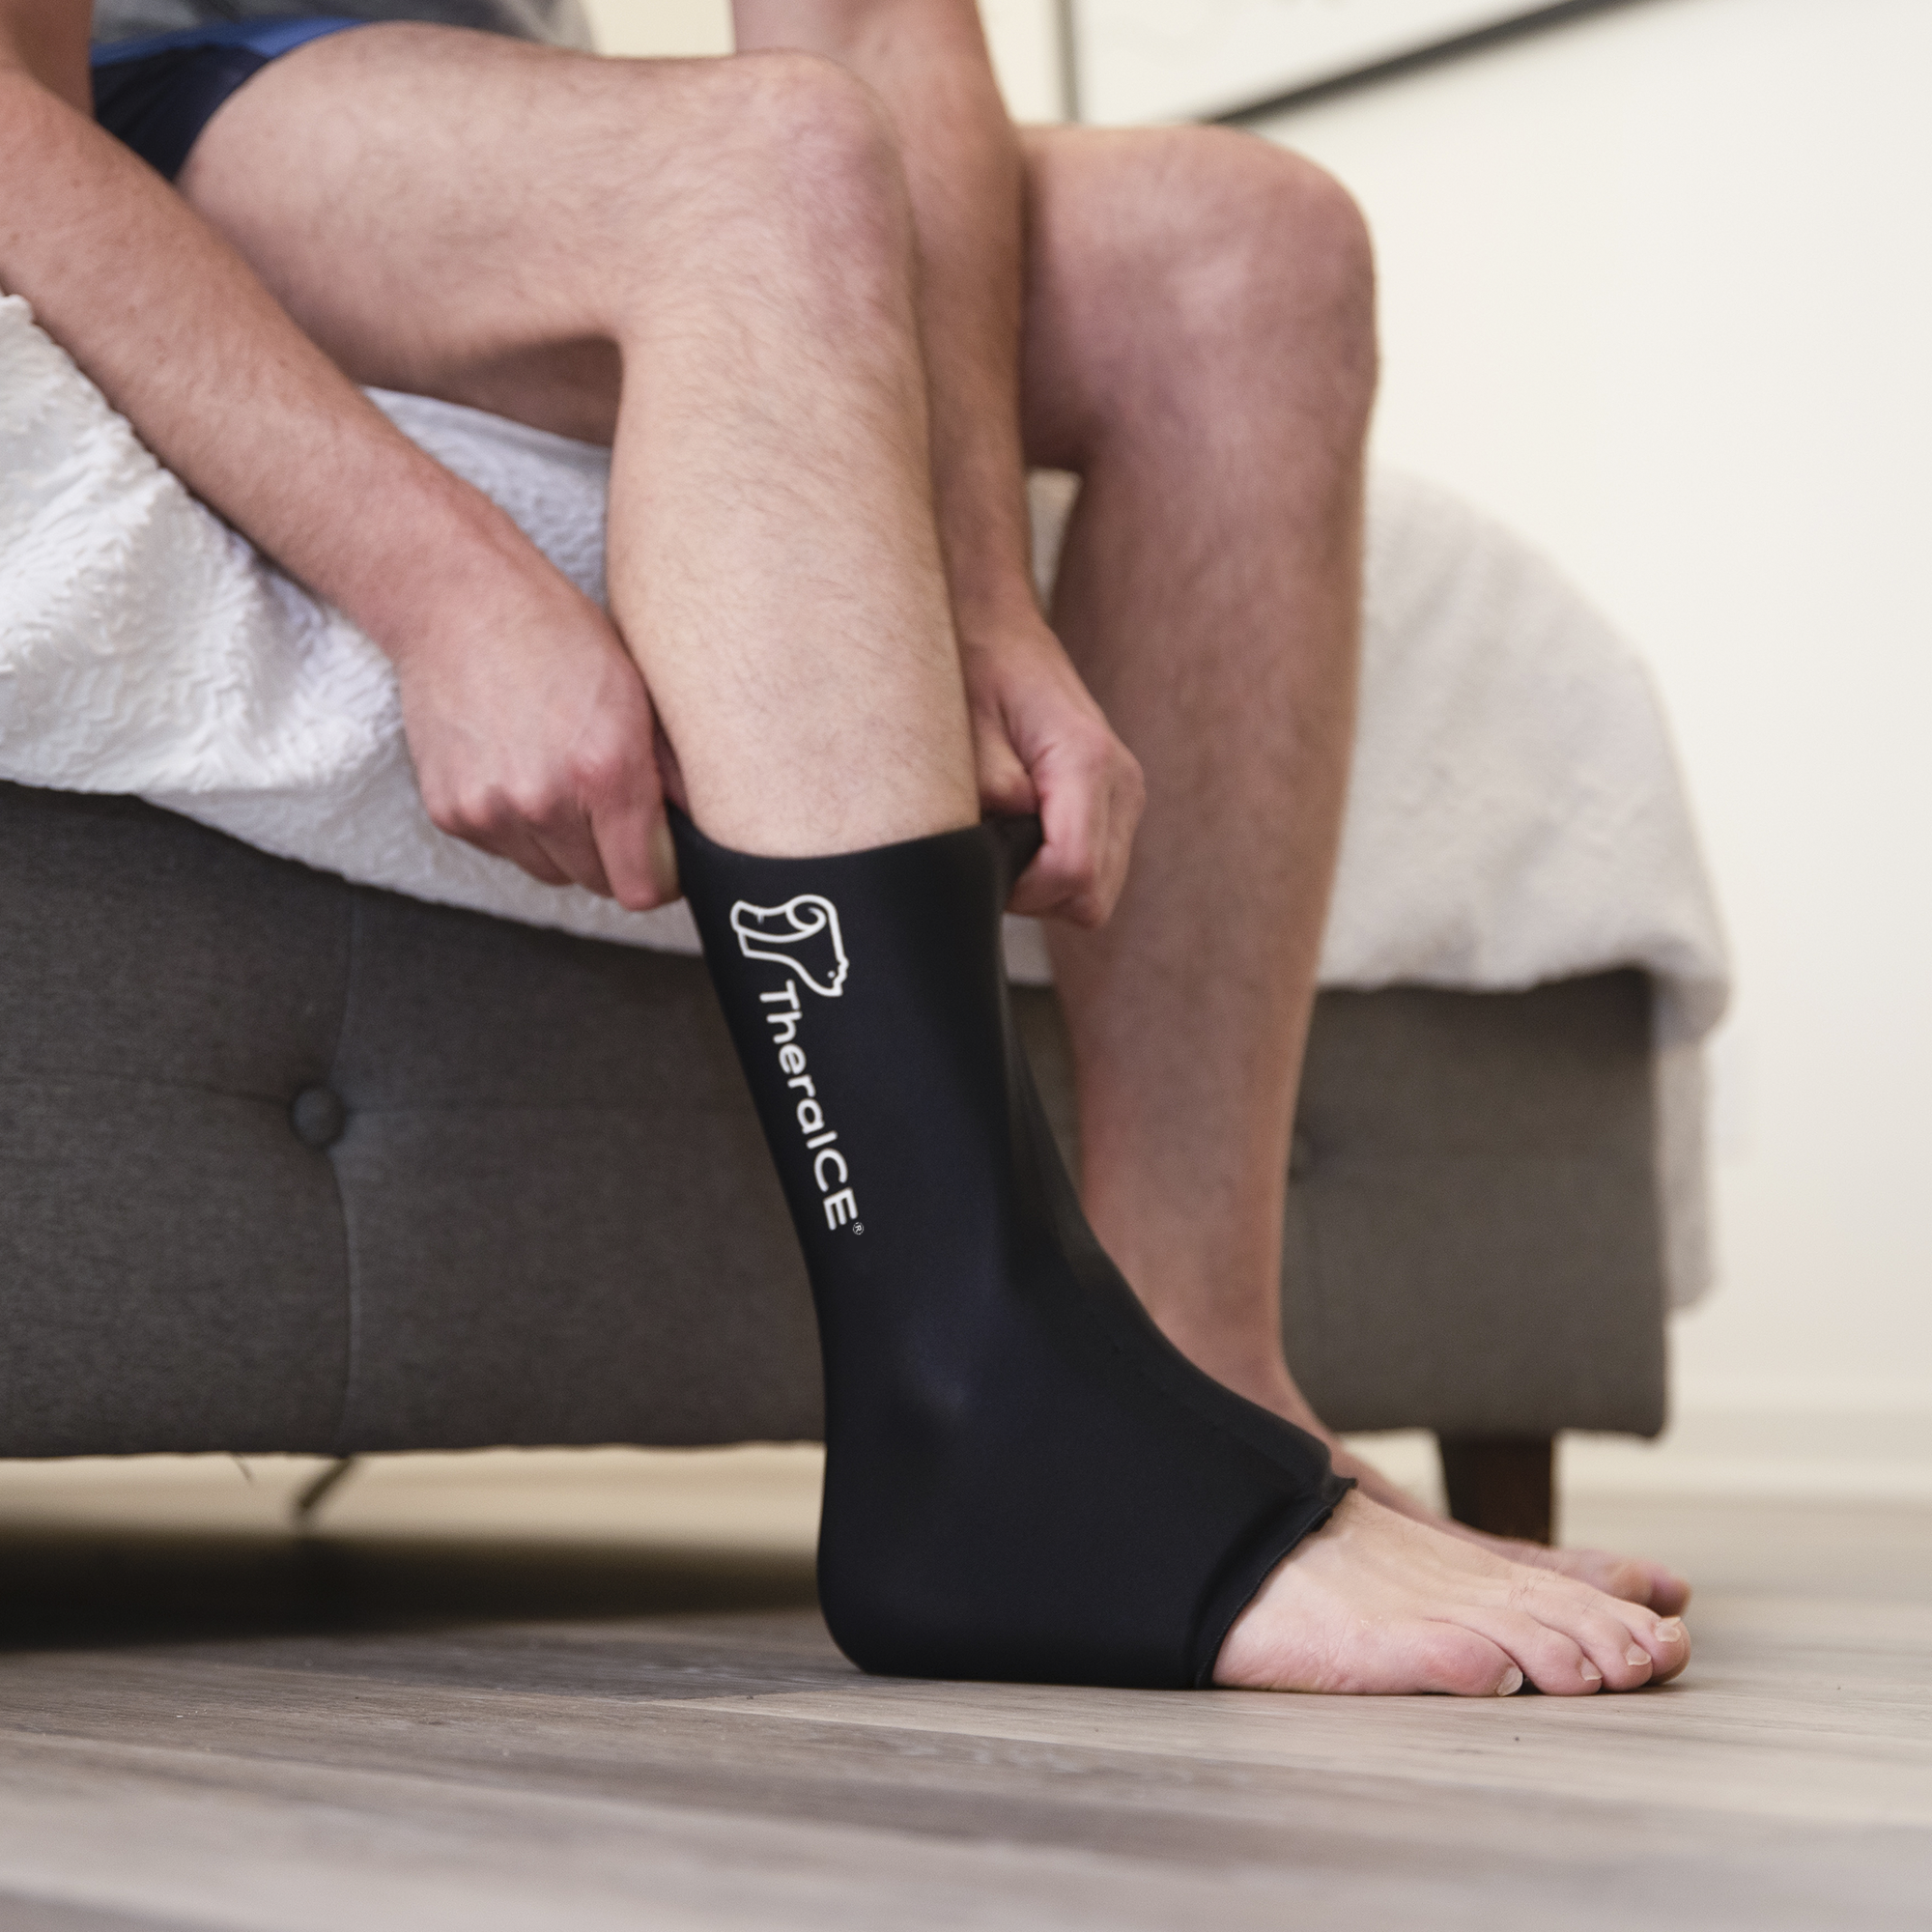 TheraICE Hot & Cold Therapy Ankle Sleeve